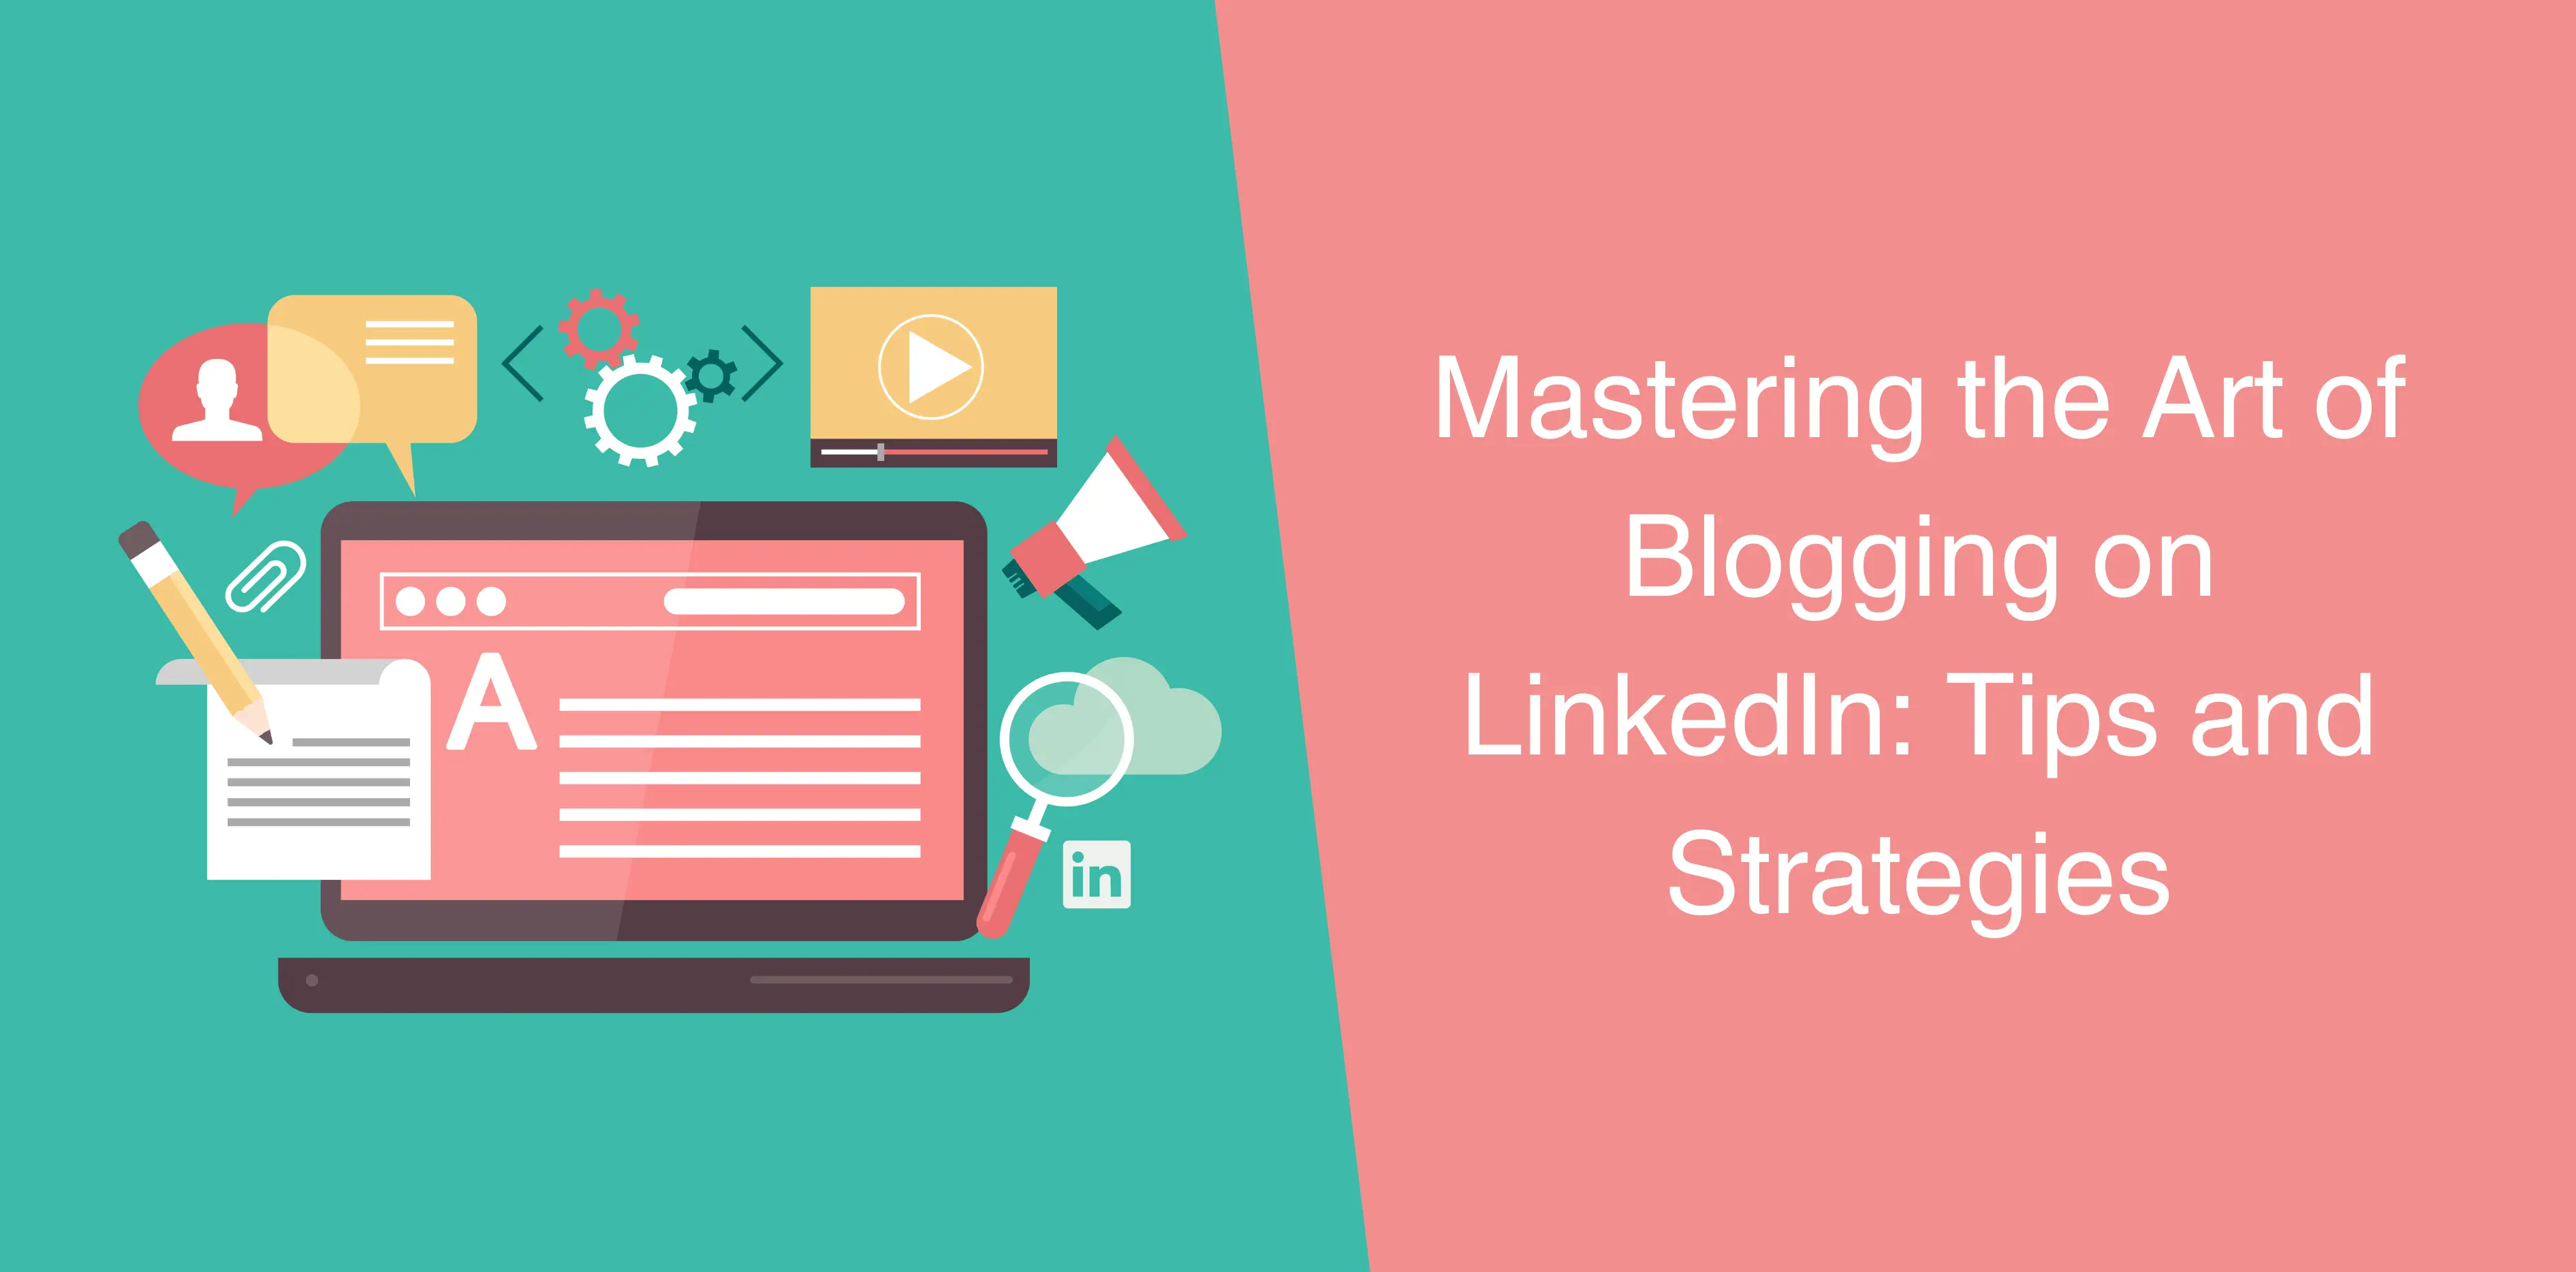 Mastering the Art of Blogging on LinkedIn: Tips and Strategies